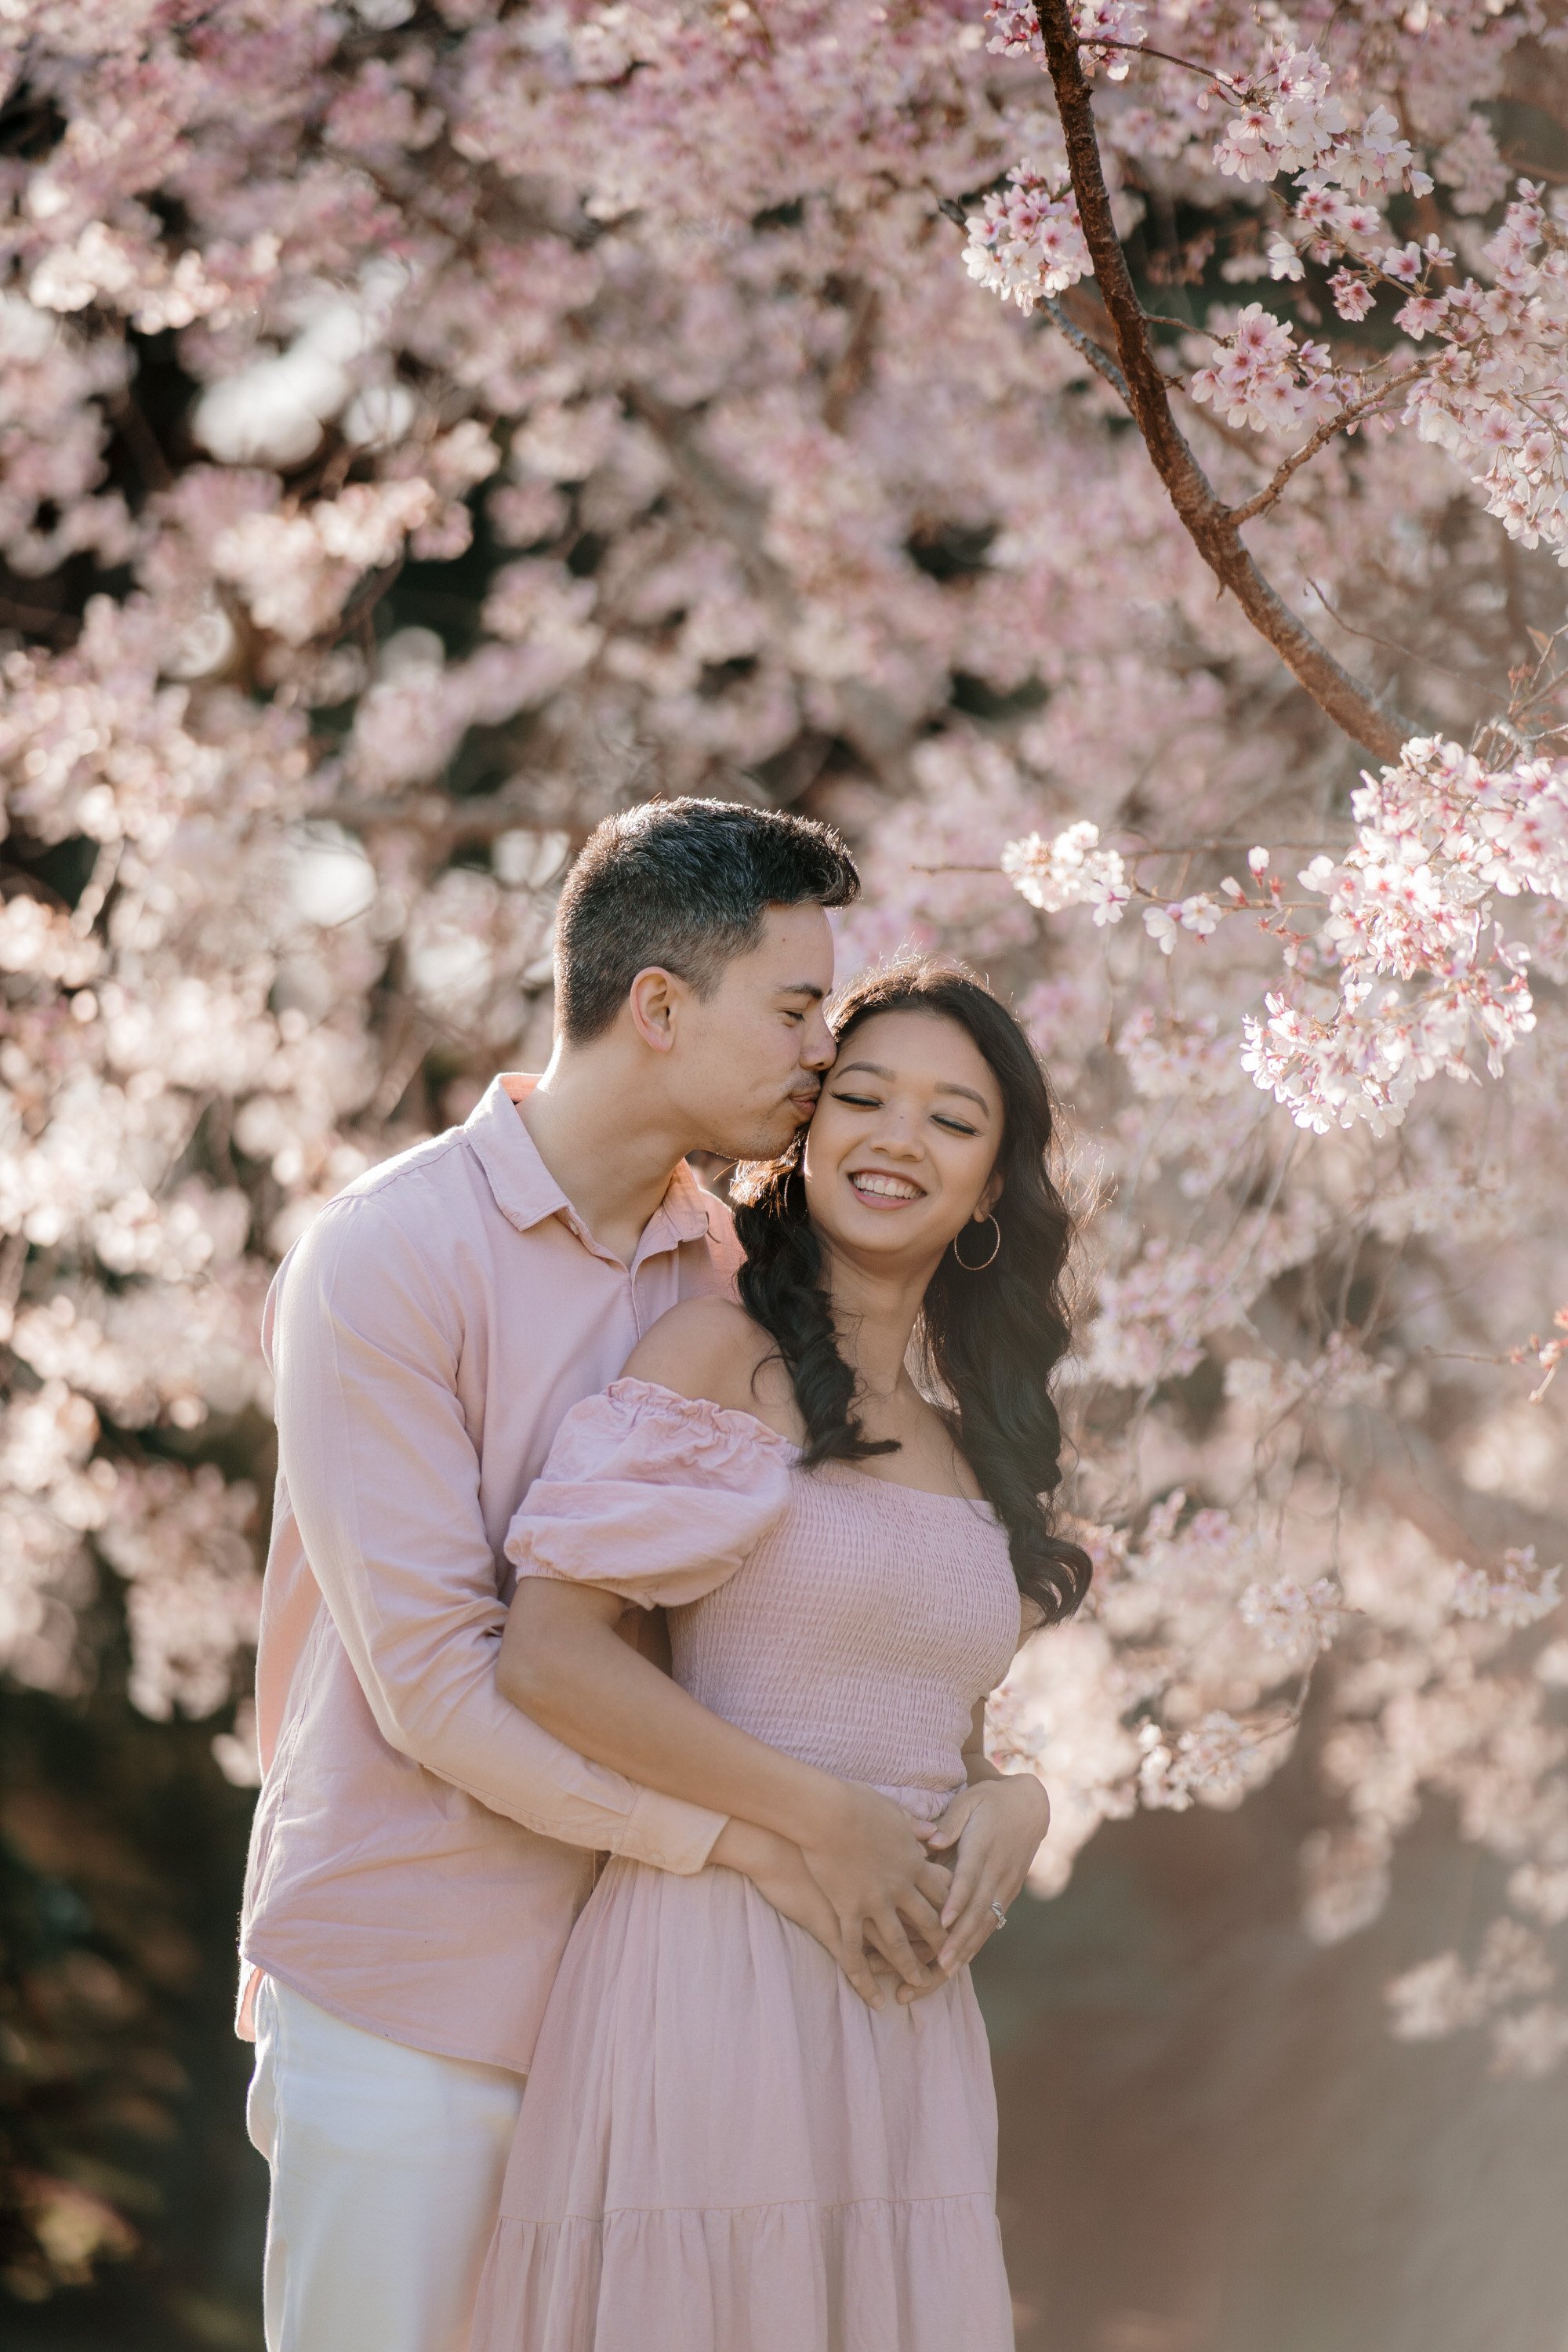 nate-and-thea-singers-duo-2023-top-auckland-wedding-phtographer-photography-videography-film-new-zealand-NZ-best-band-cherry-blossom-botanical-garden-engagement-elopement-dear-white-productions (34).jpg